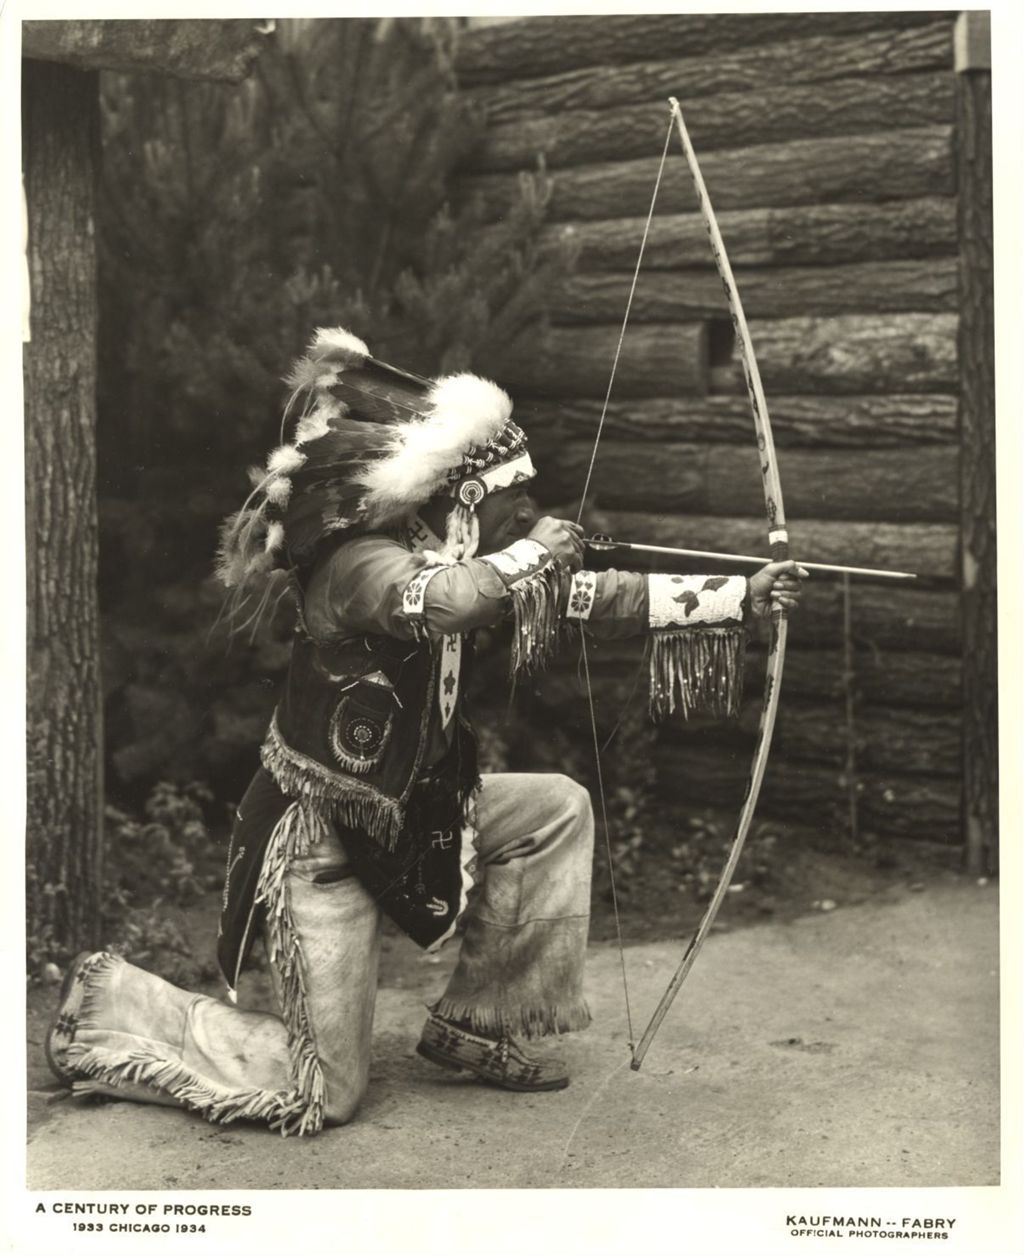 American Indian demonstrating the use of a bow and arrow at the Indian Village